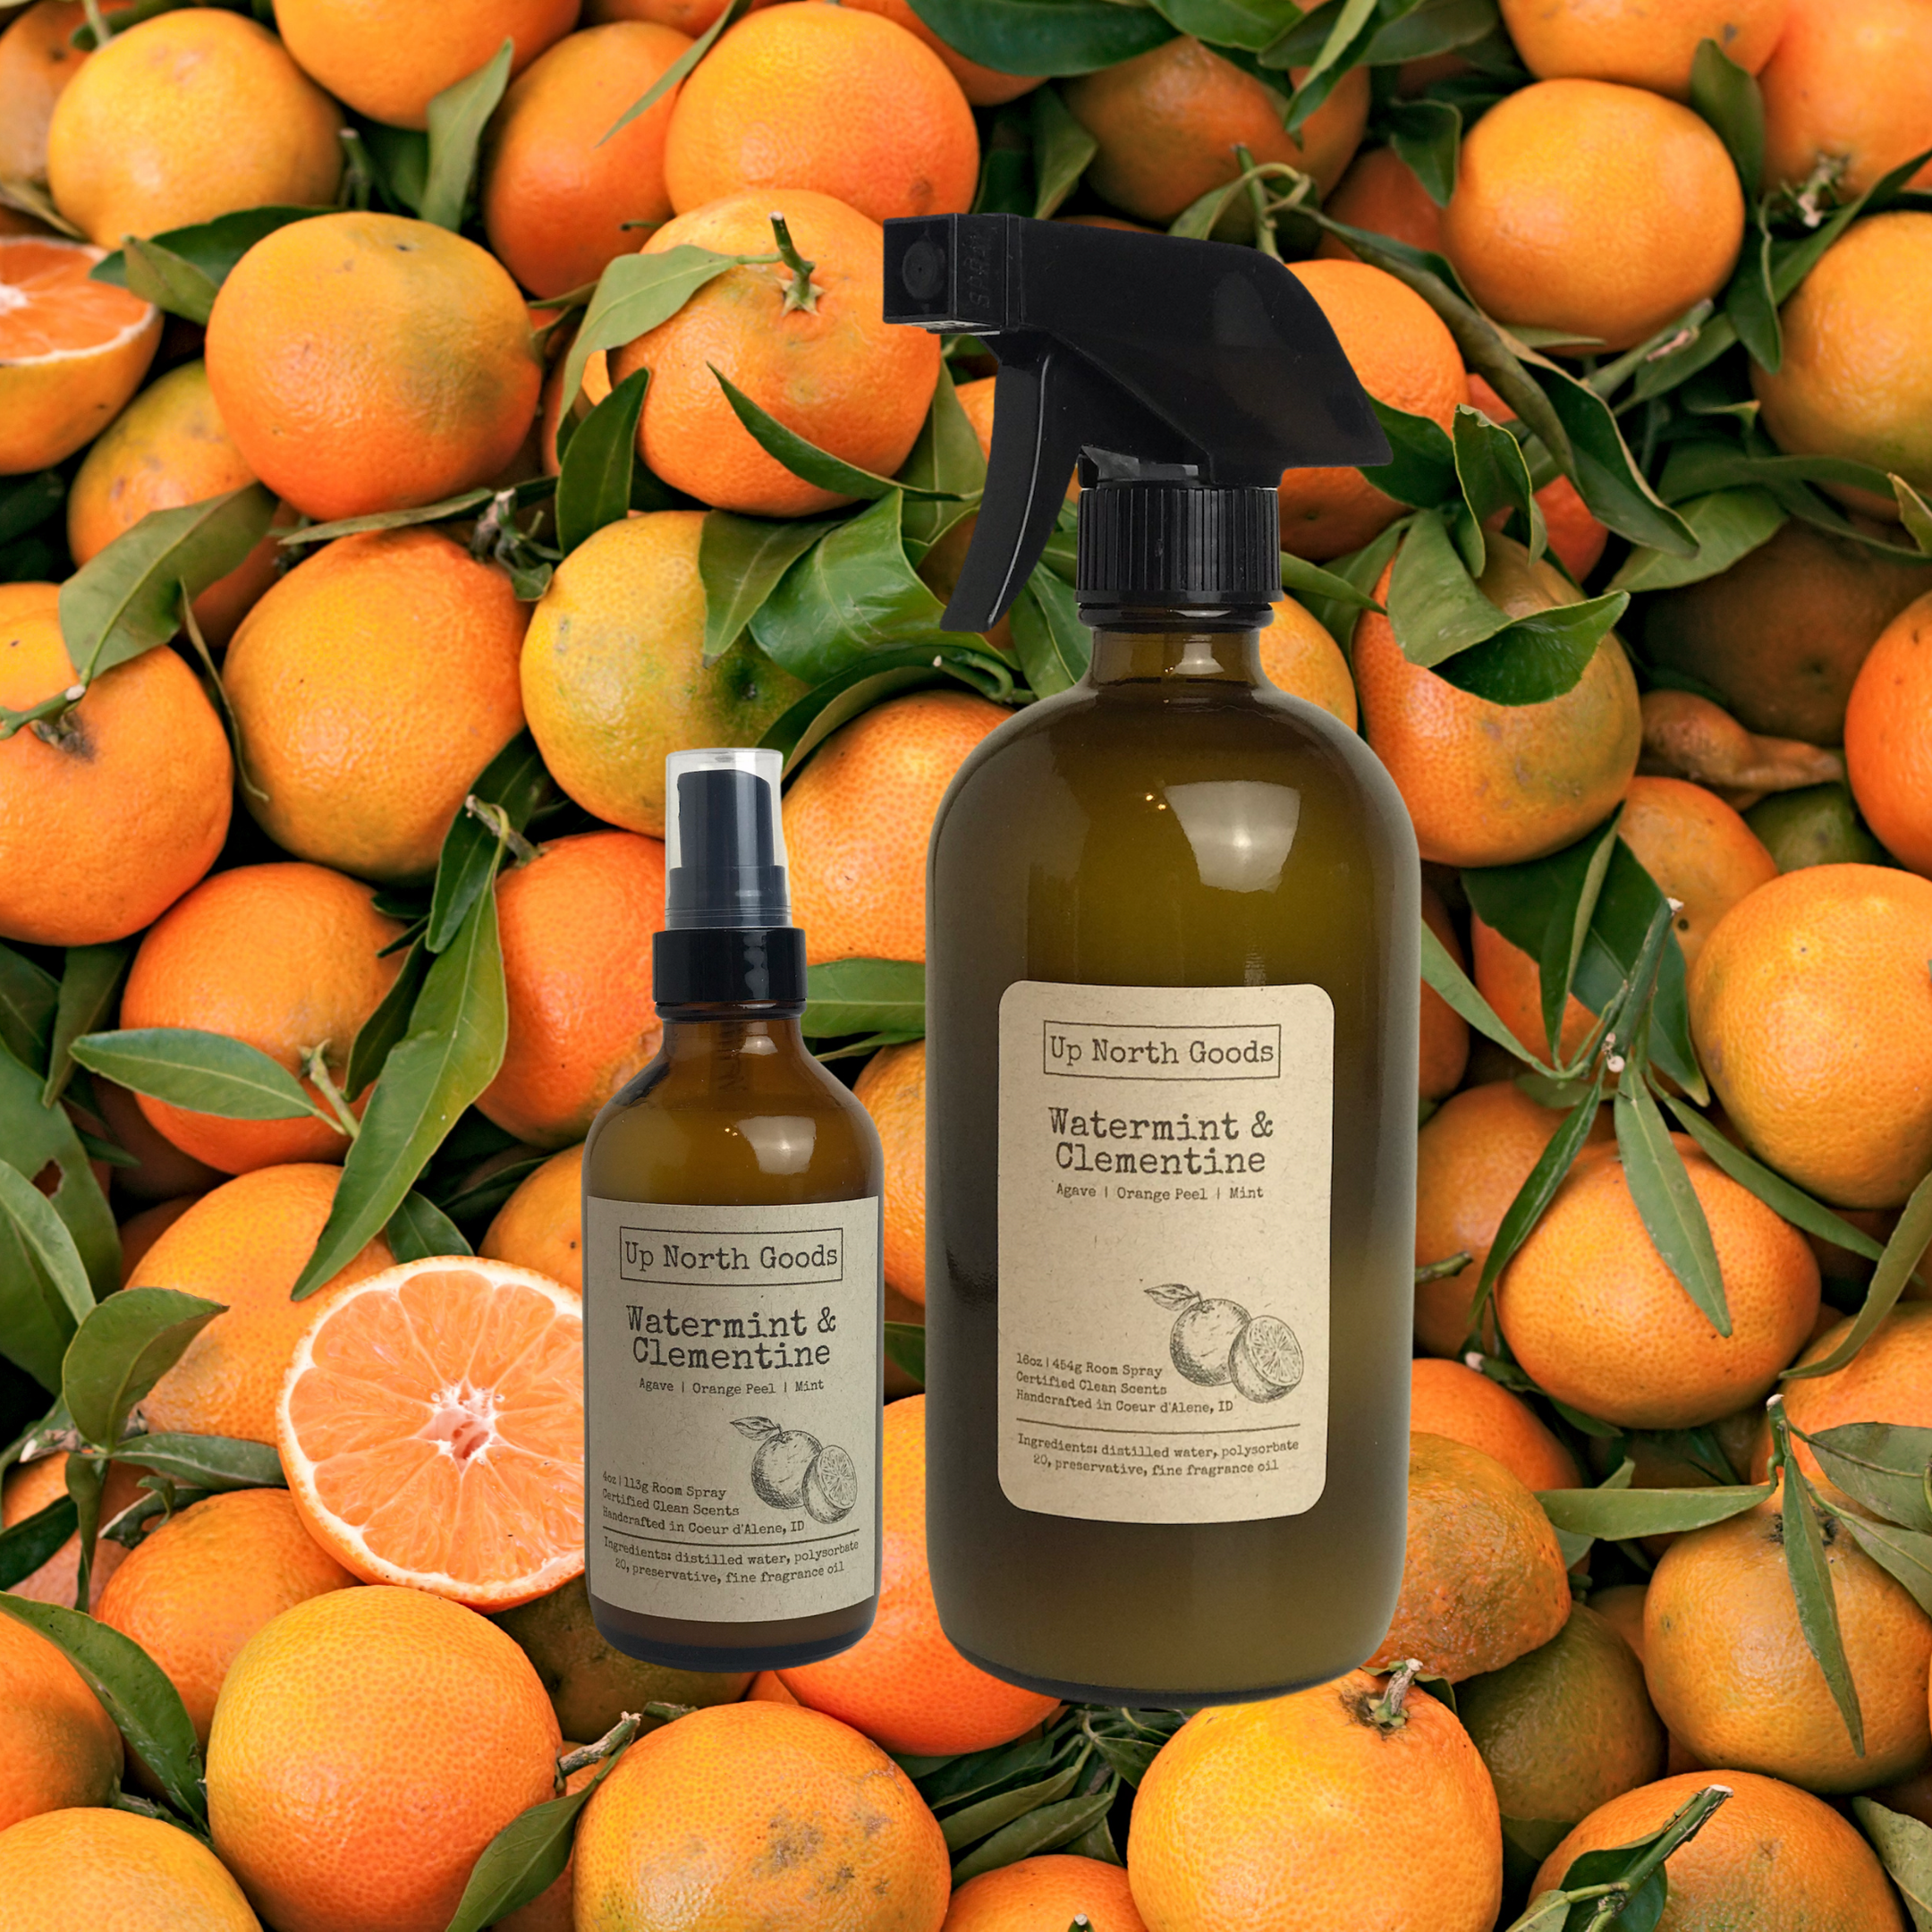 Watermint and Clementine Room Spray